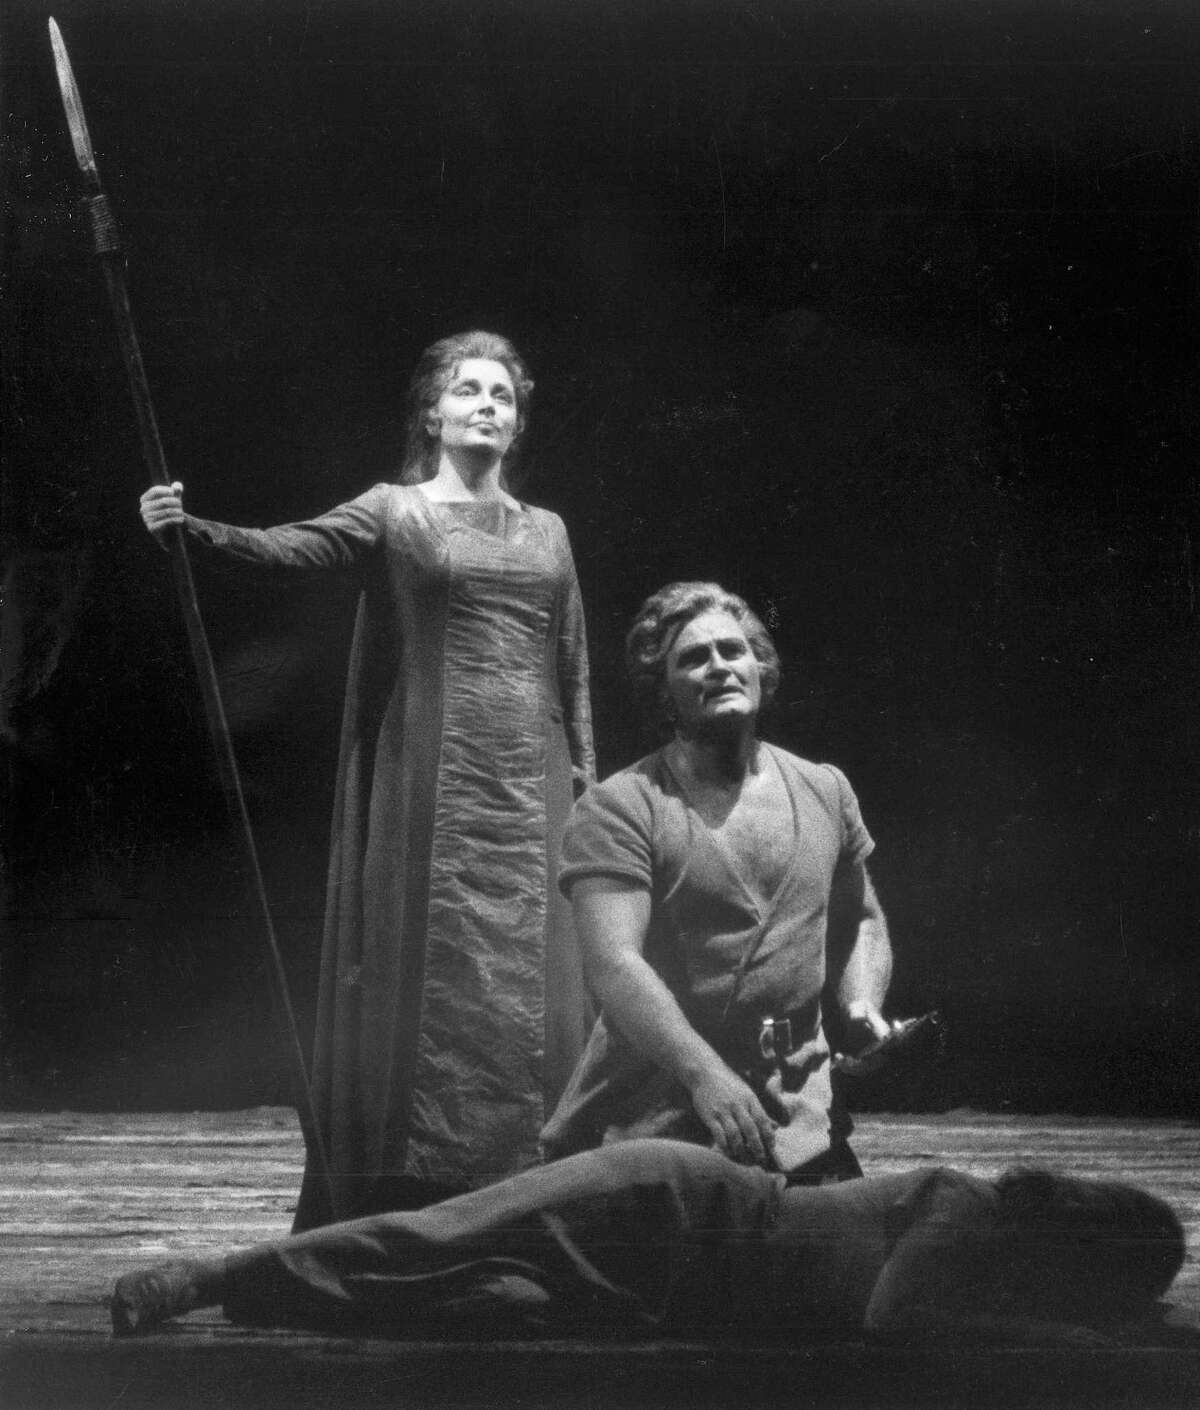 In this 1976 file photo, Roberta Knie, as Brunnhilder and Jon Vickers, in Siegmund, are seen in the San Francisco Opera’s production of “Die Walkure” (The Valkyrie) in San Francisco.